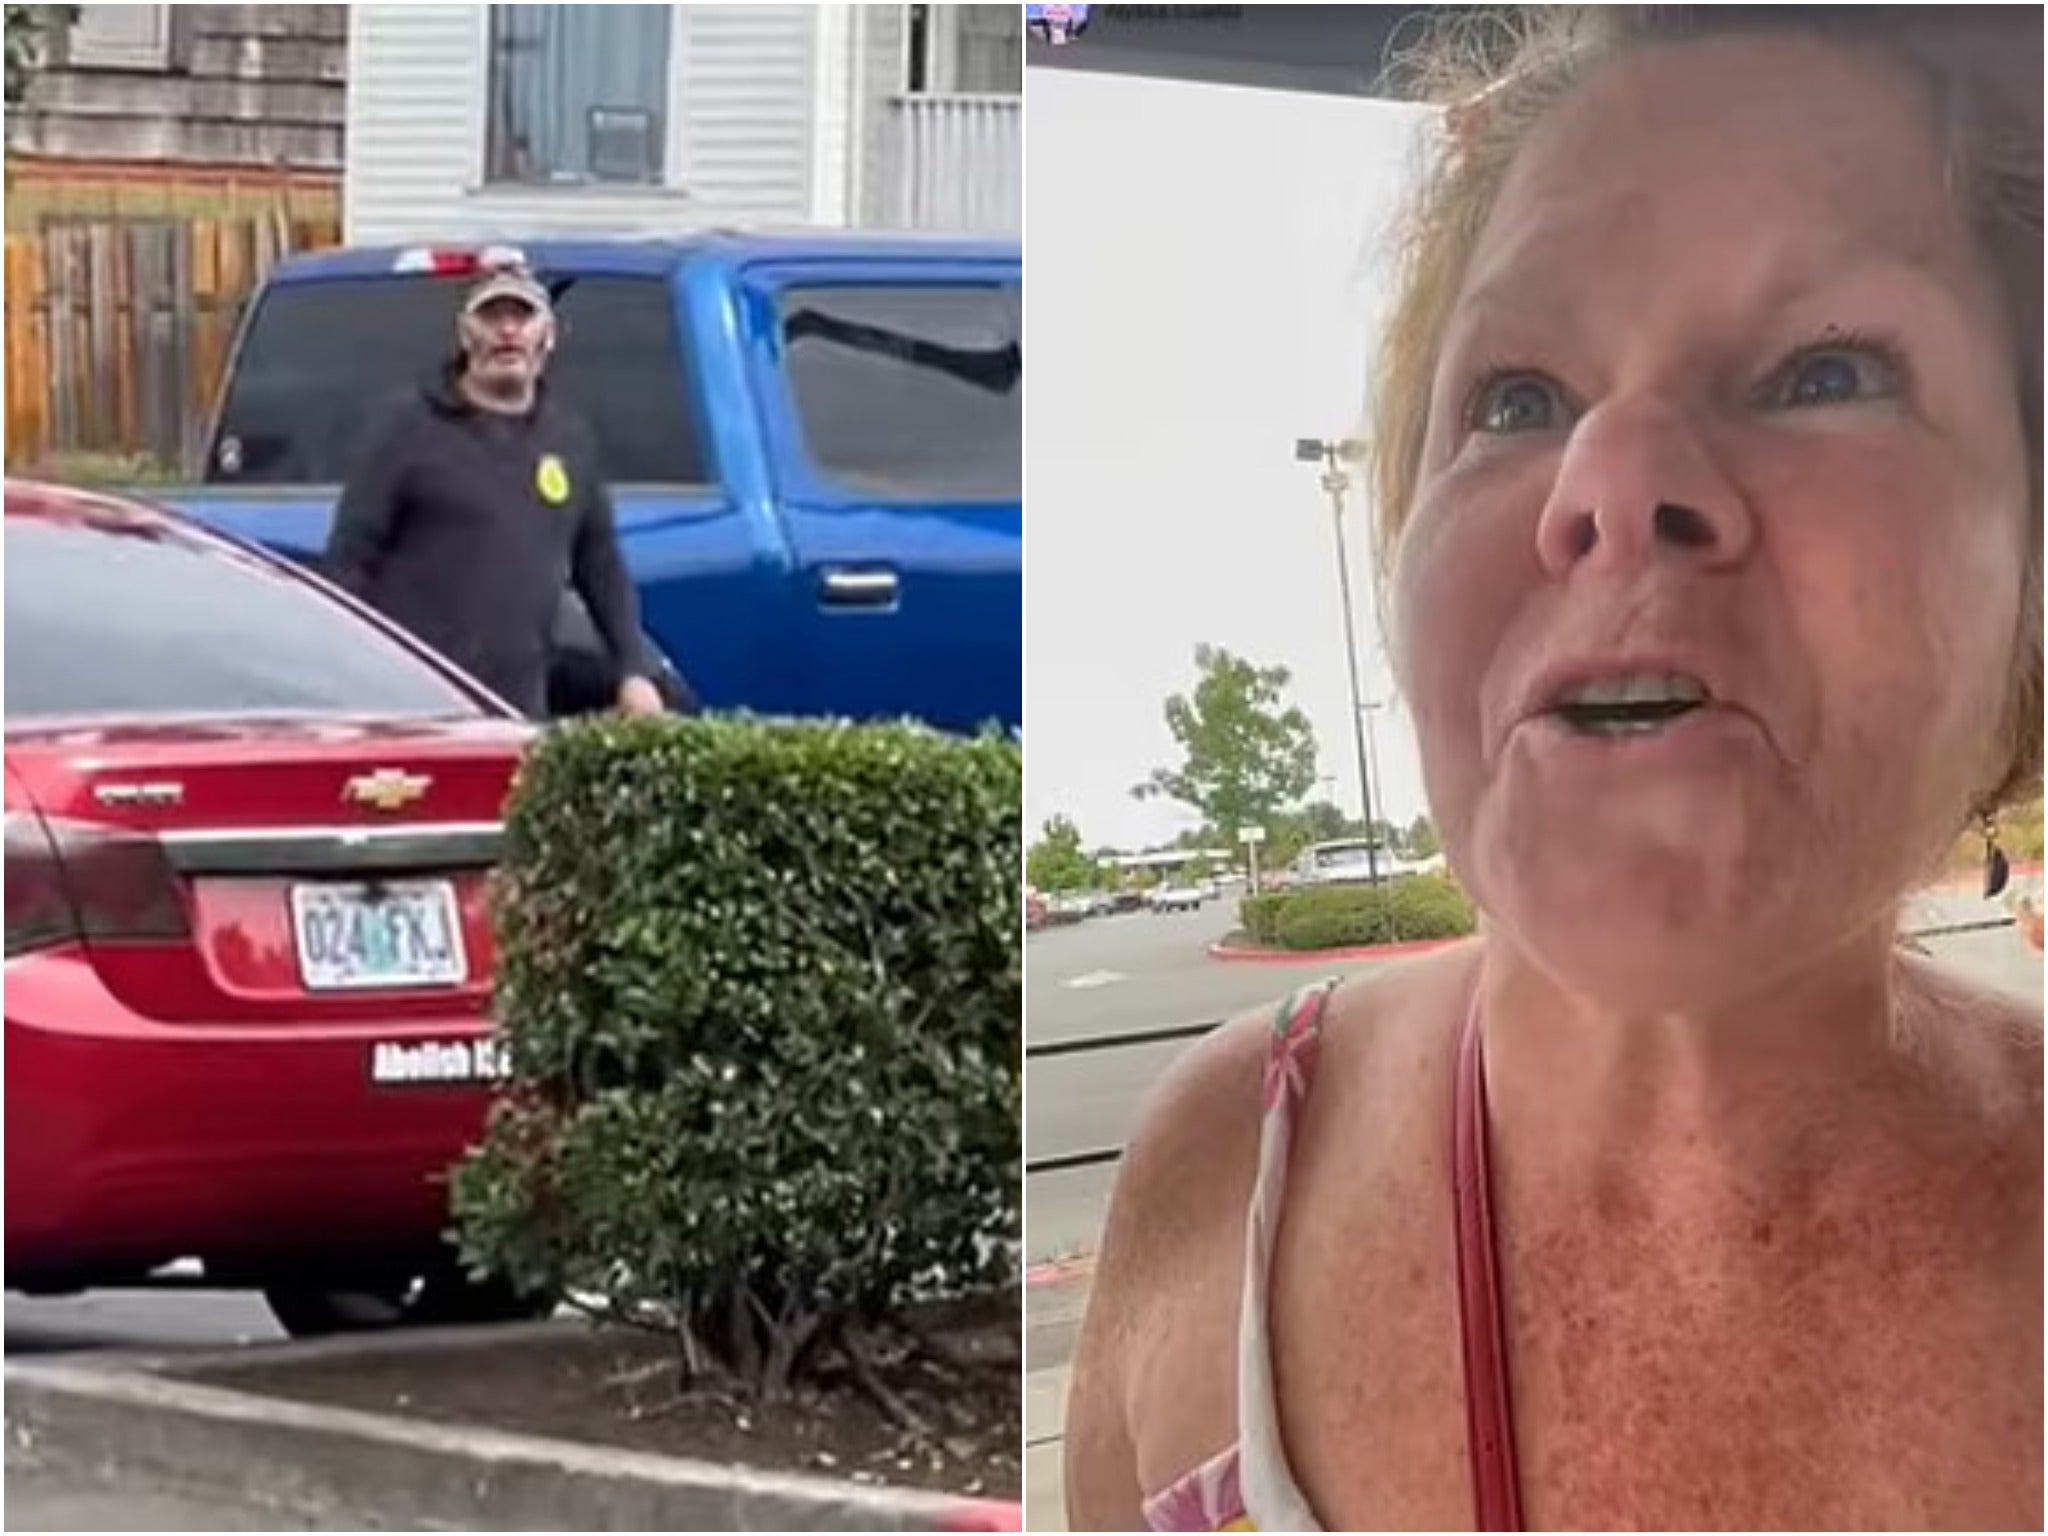 A 57-year-old woman has been arrested after “attacking” a driver with an “Abolish ICE” sticker on her car